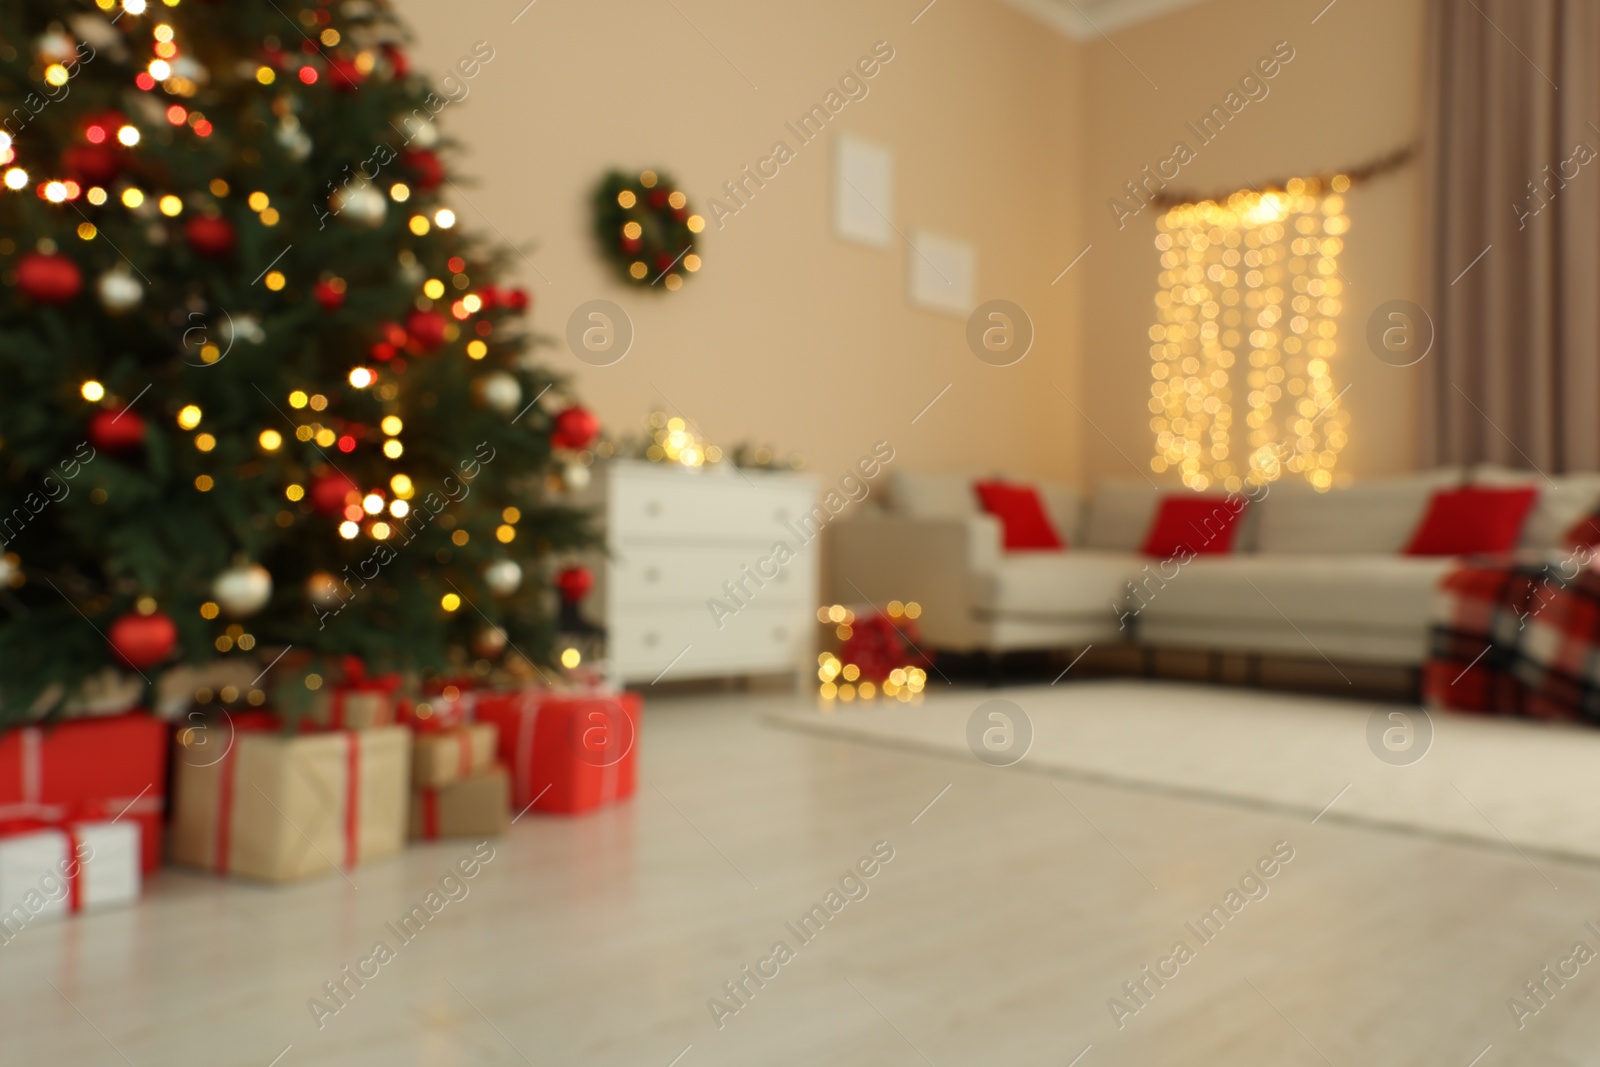 Photo of Beautiful tree decorated for Christmas, chest of drawers and sofa in room, blurred view. Interior design